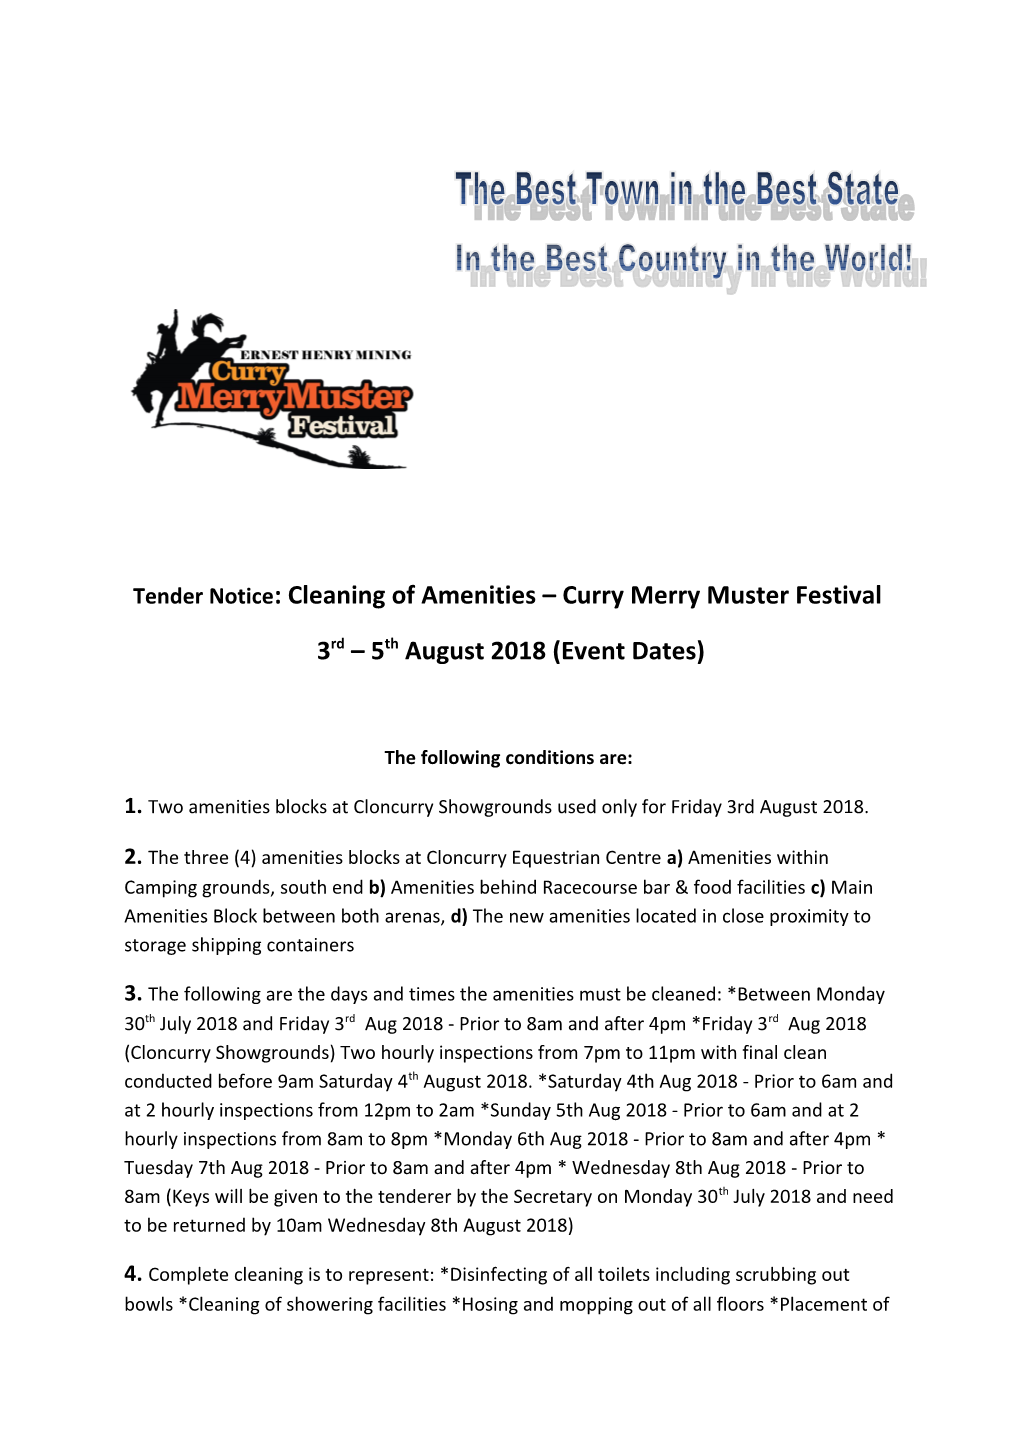 Tender Notice: Cleaning of Amenities Curry Merry Muster Festival